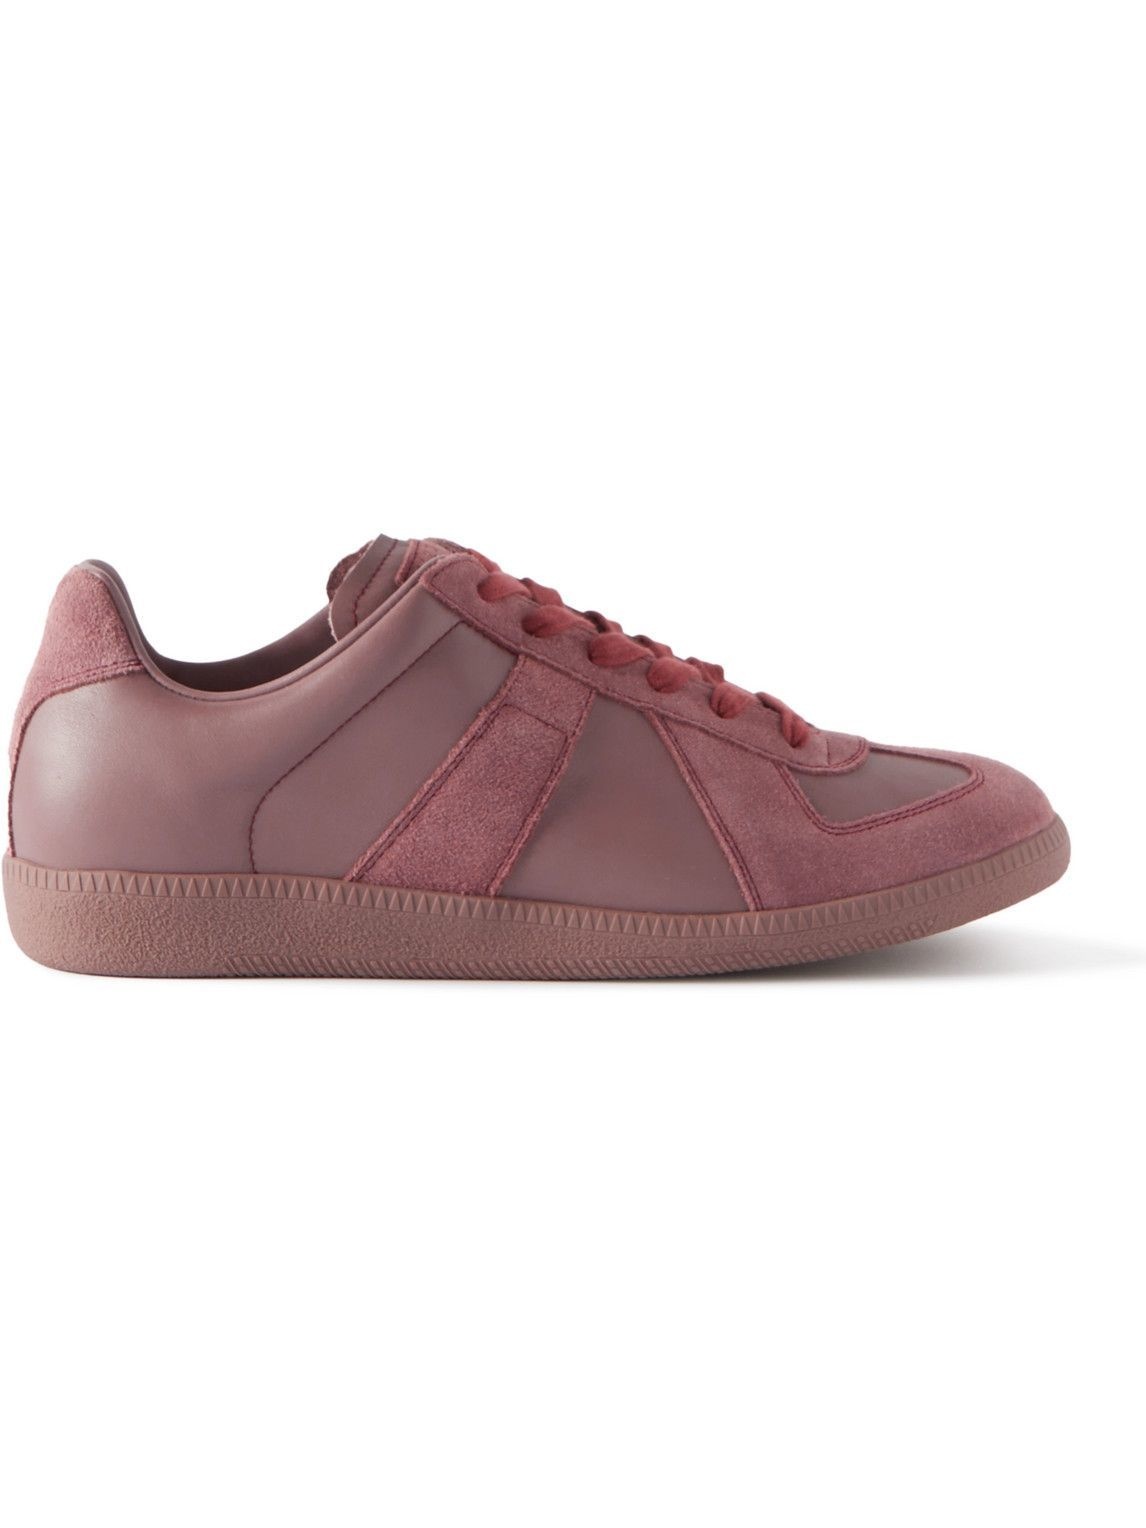 Maison Margiela - Replica Leather and Suede Sneakers - Pink Maison Margiela